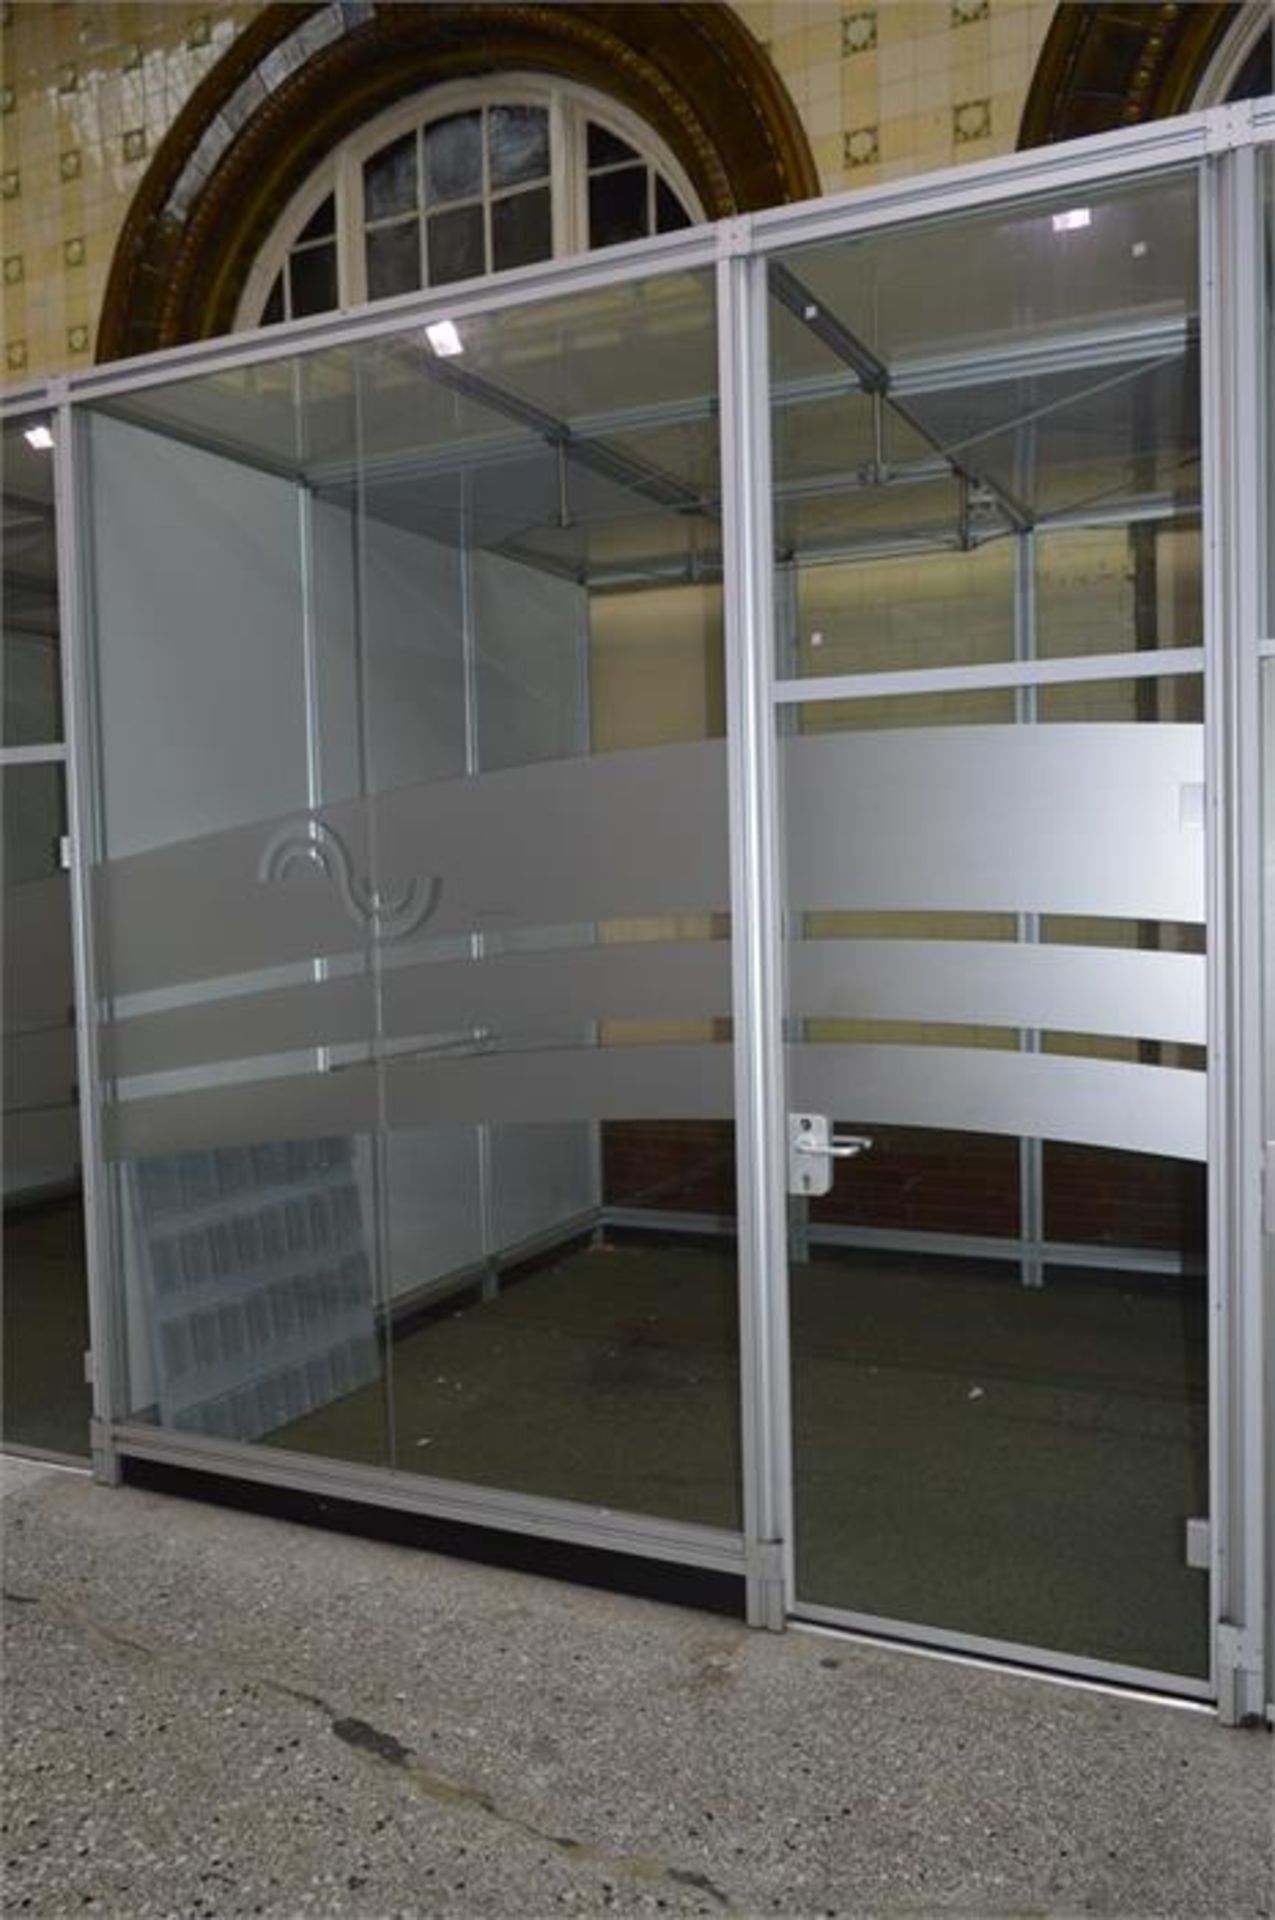 SECTIONAL MODULAR FREE STANDING ALUMINIUM GLASS OFFICE RETAIL UNITS ORIGINAL COST EXCESS OF £60,000 - Image 5 of 8